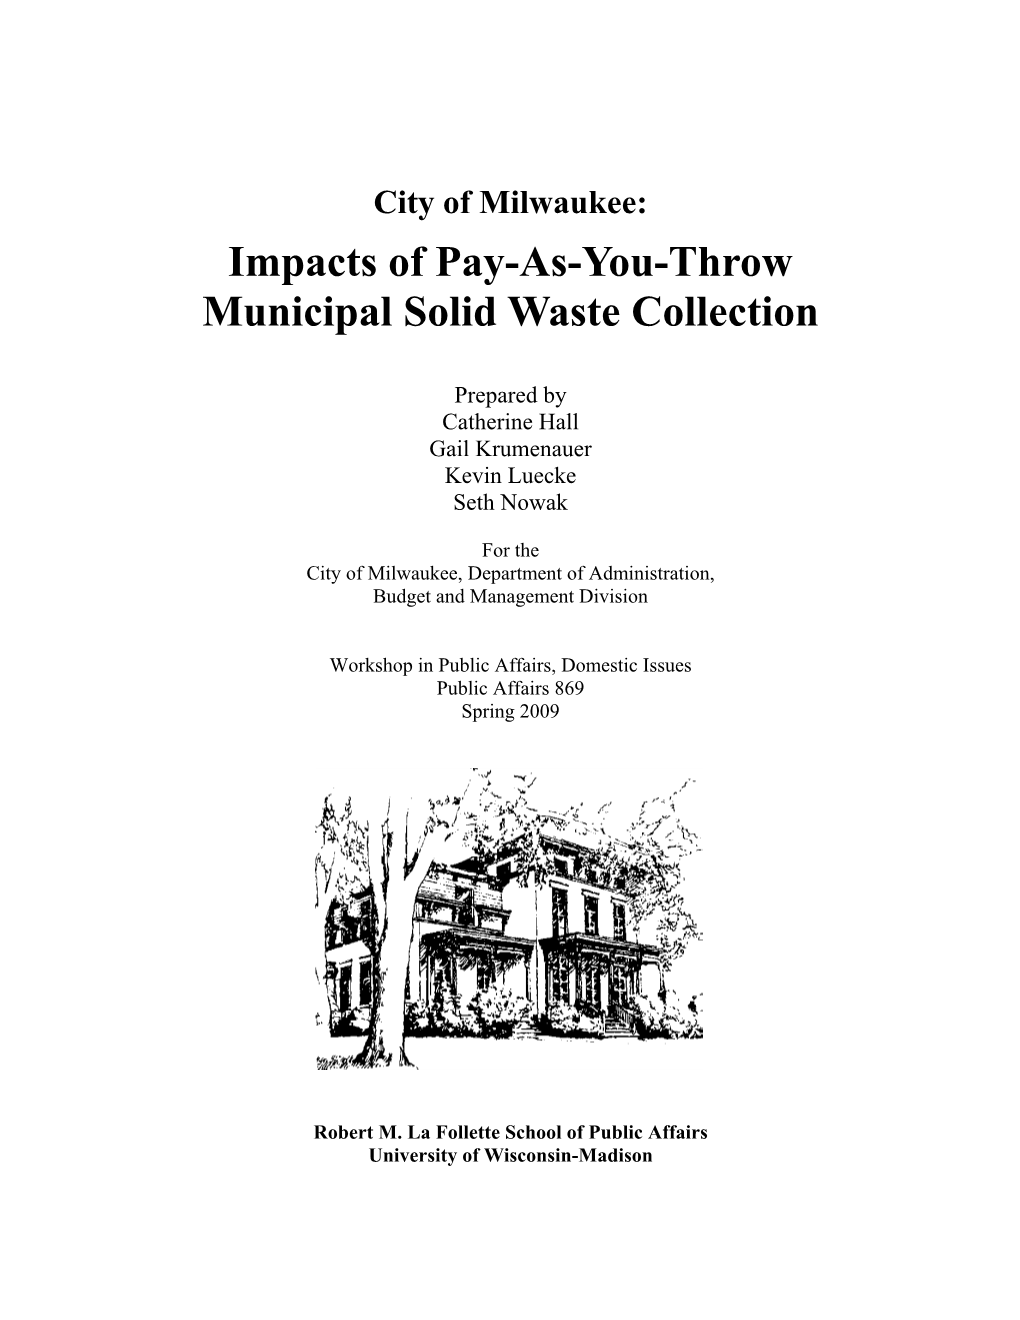 Impacts of Pay-As-You-Throw Municipal Solid Waste Collection